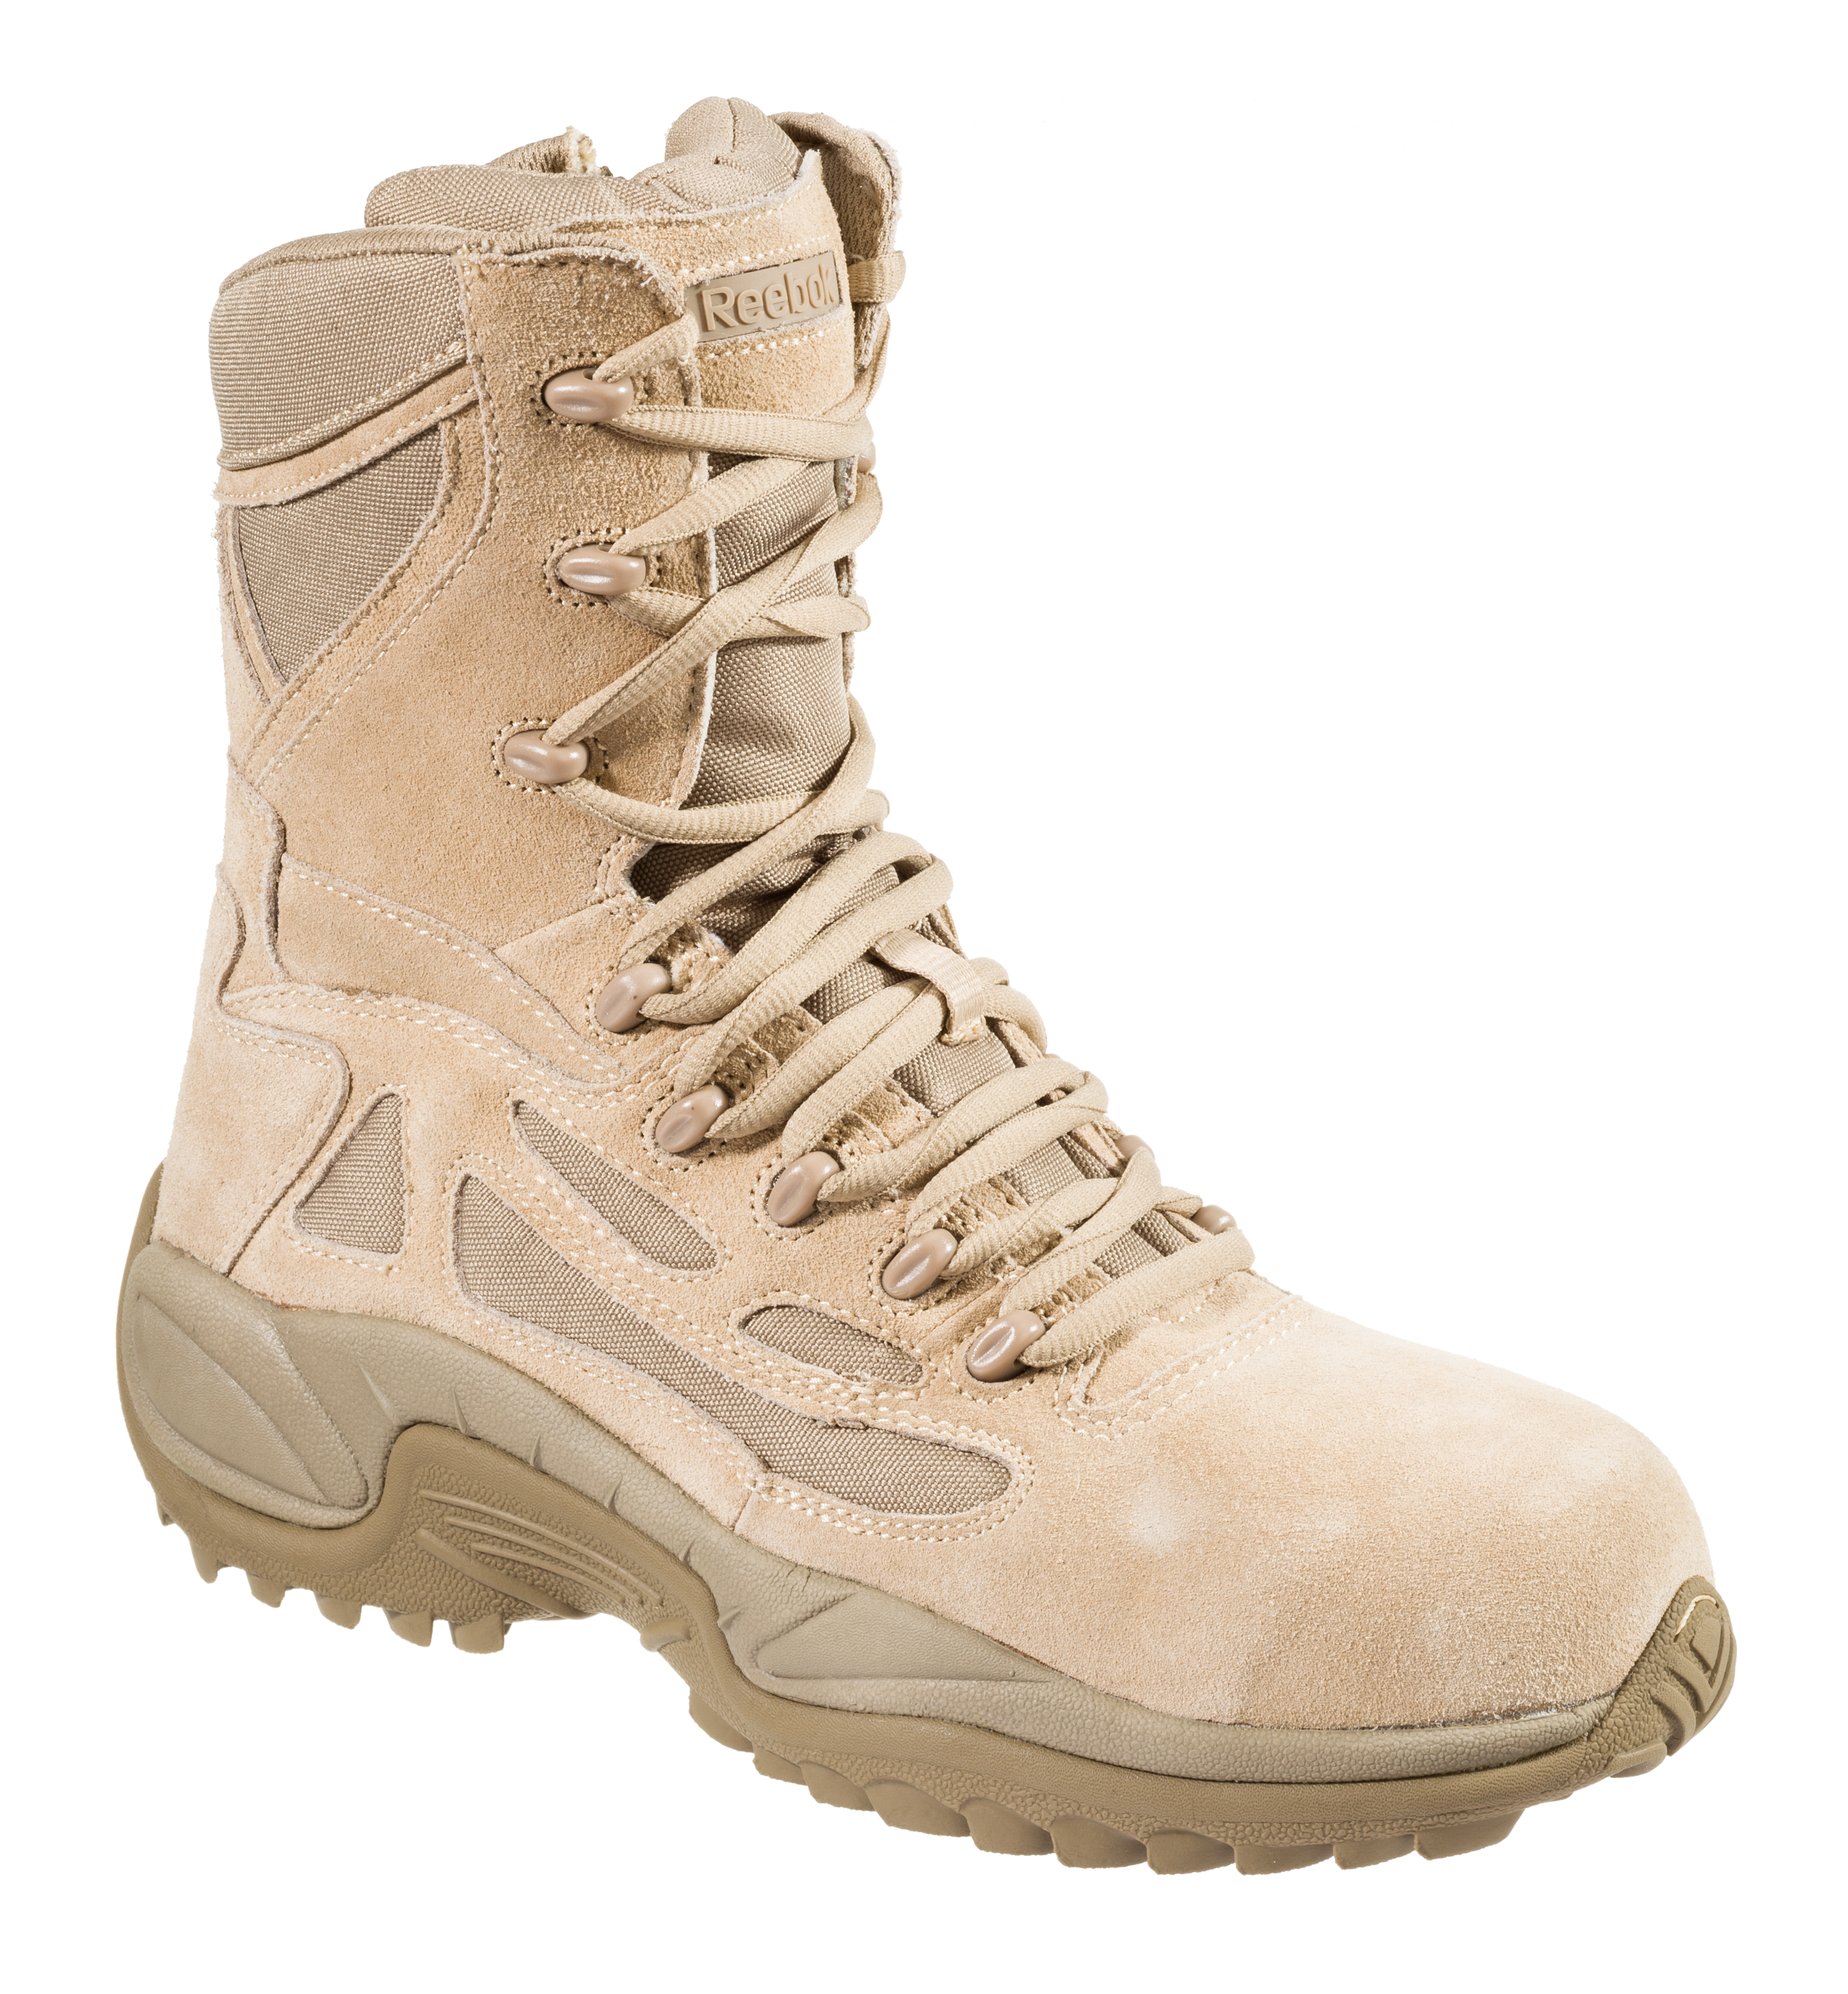 Reebok Rapid Response RB Side-Zip Safety Toe Tactical Work Boots for Men |  Bass Pro Shops